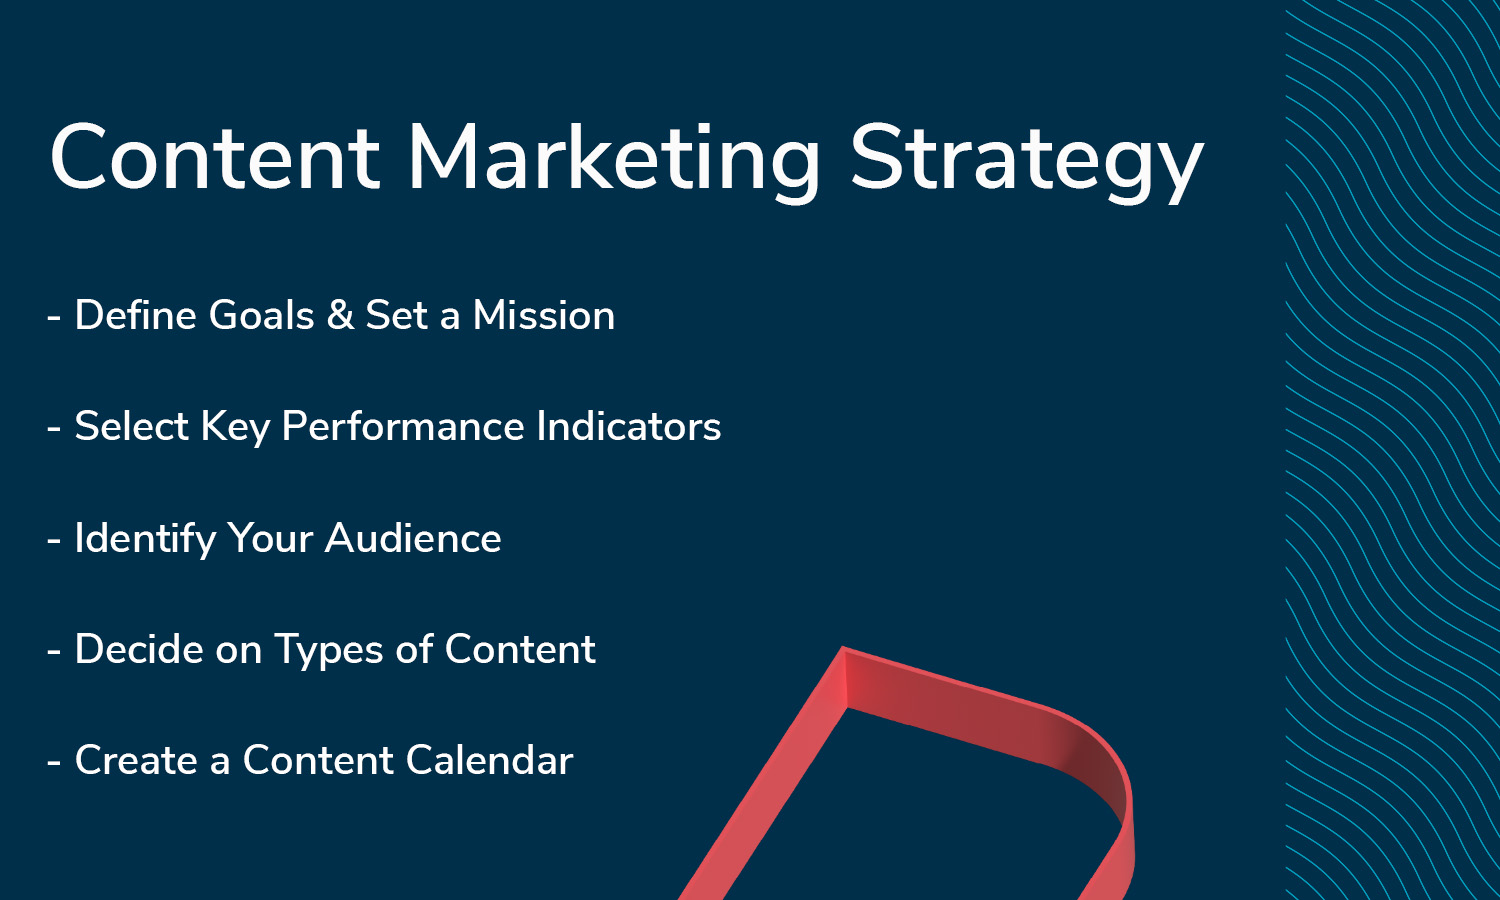 Content Marketing Strategy Overview